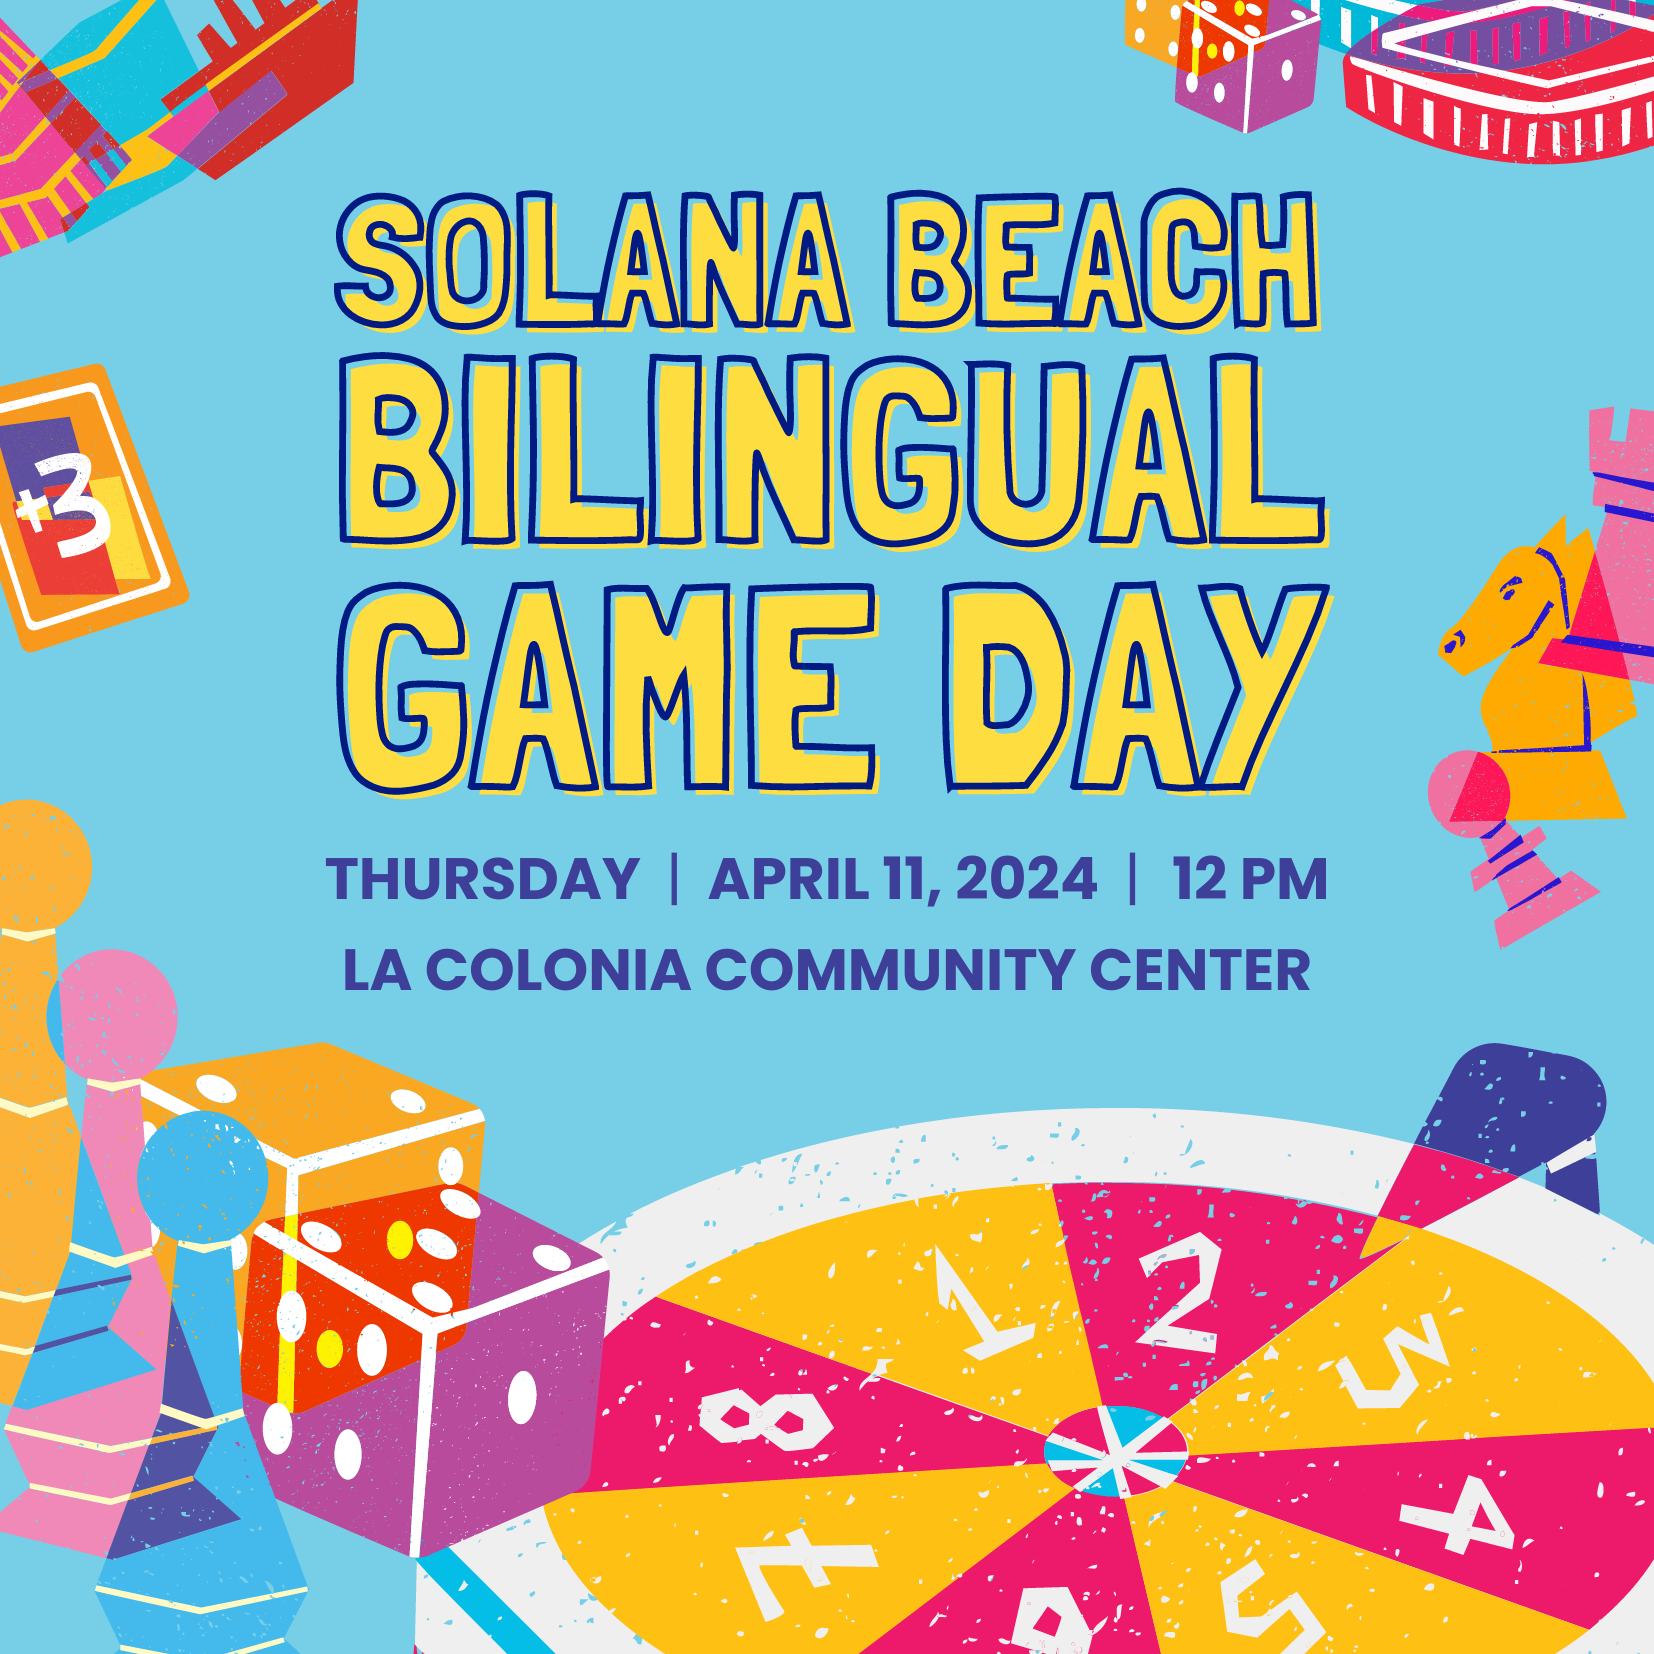 Solana Beach's First Bilingual Game Day